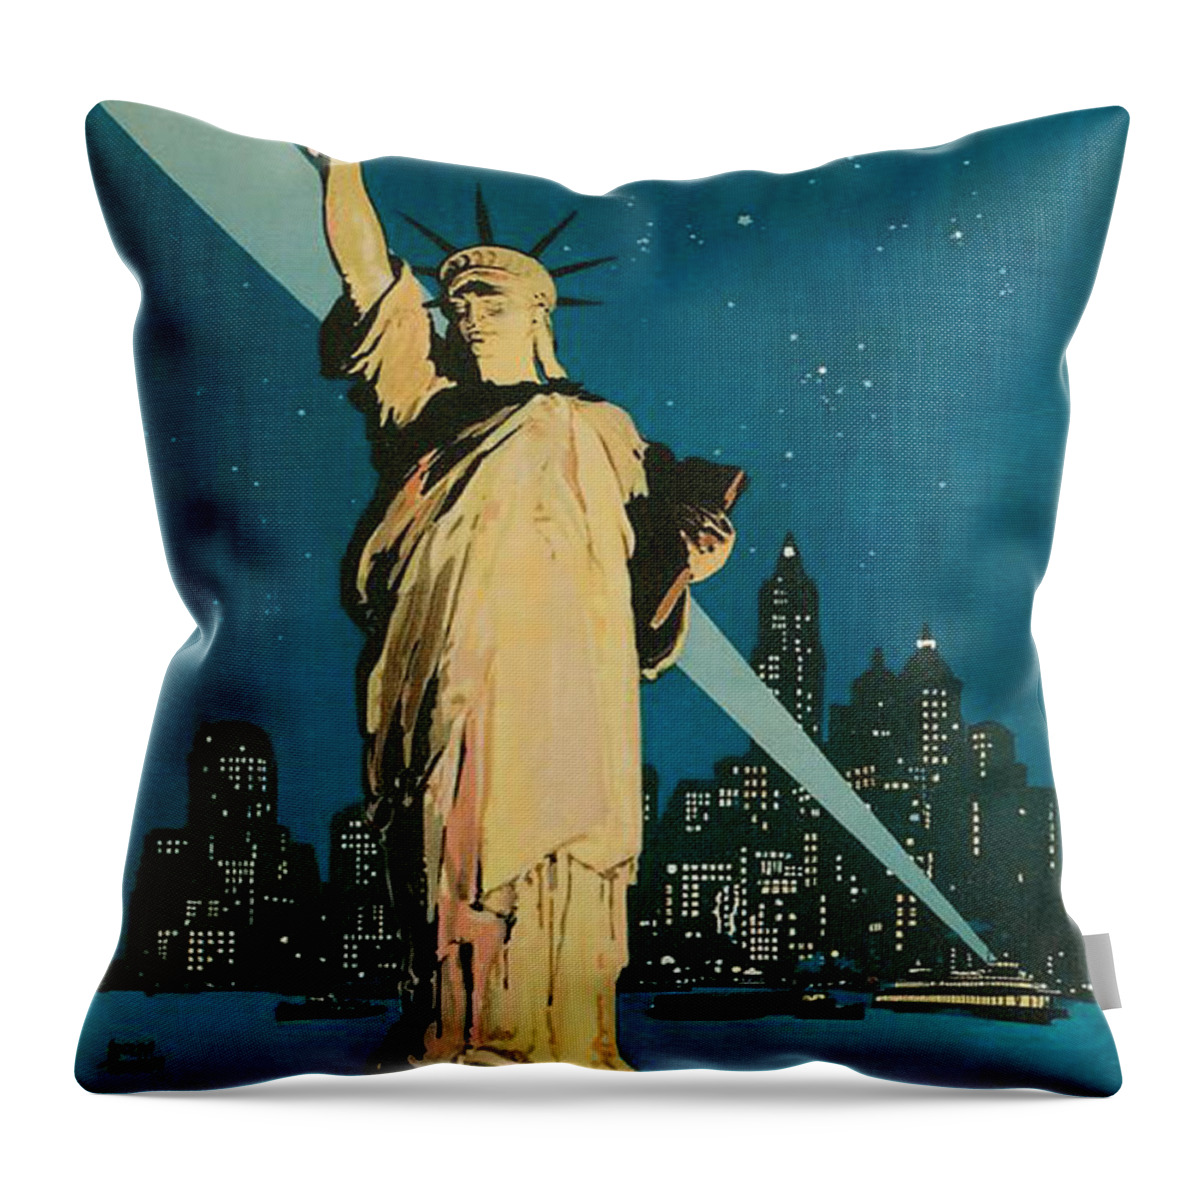 Vintage Throw Pillow featuring the digital art Vintage New York by Georgia Clare